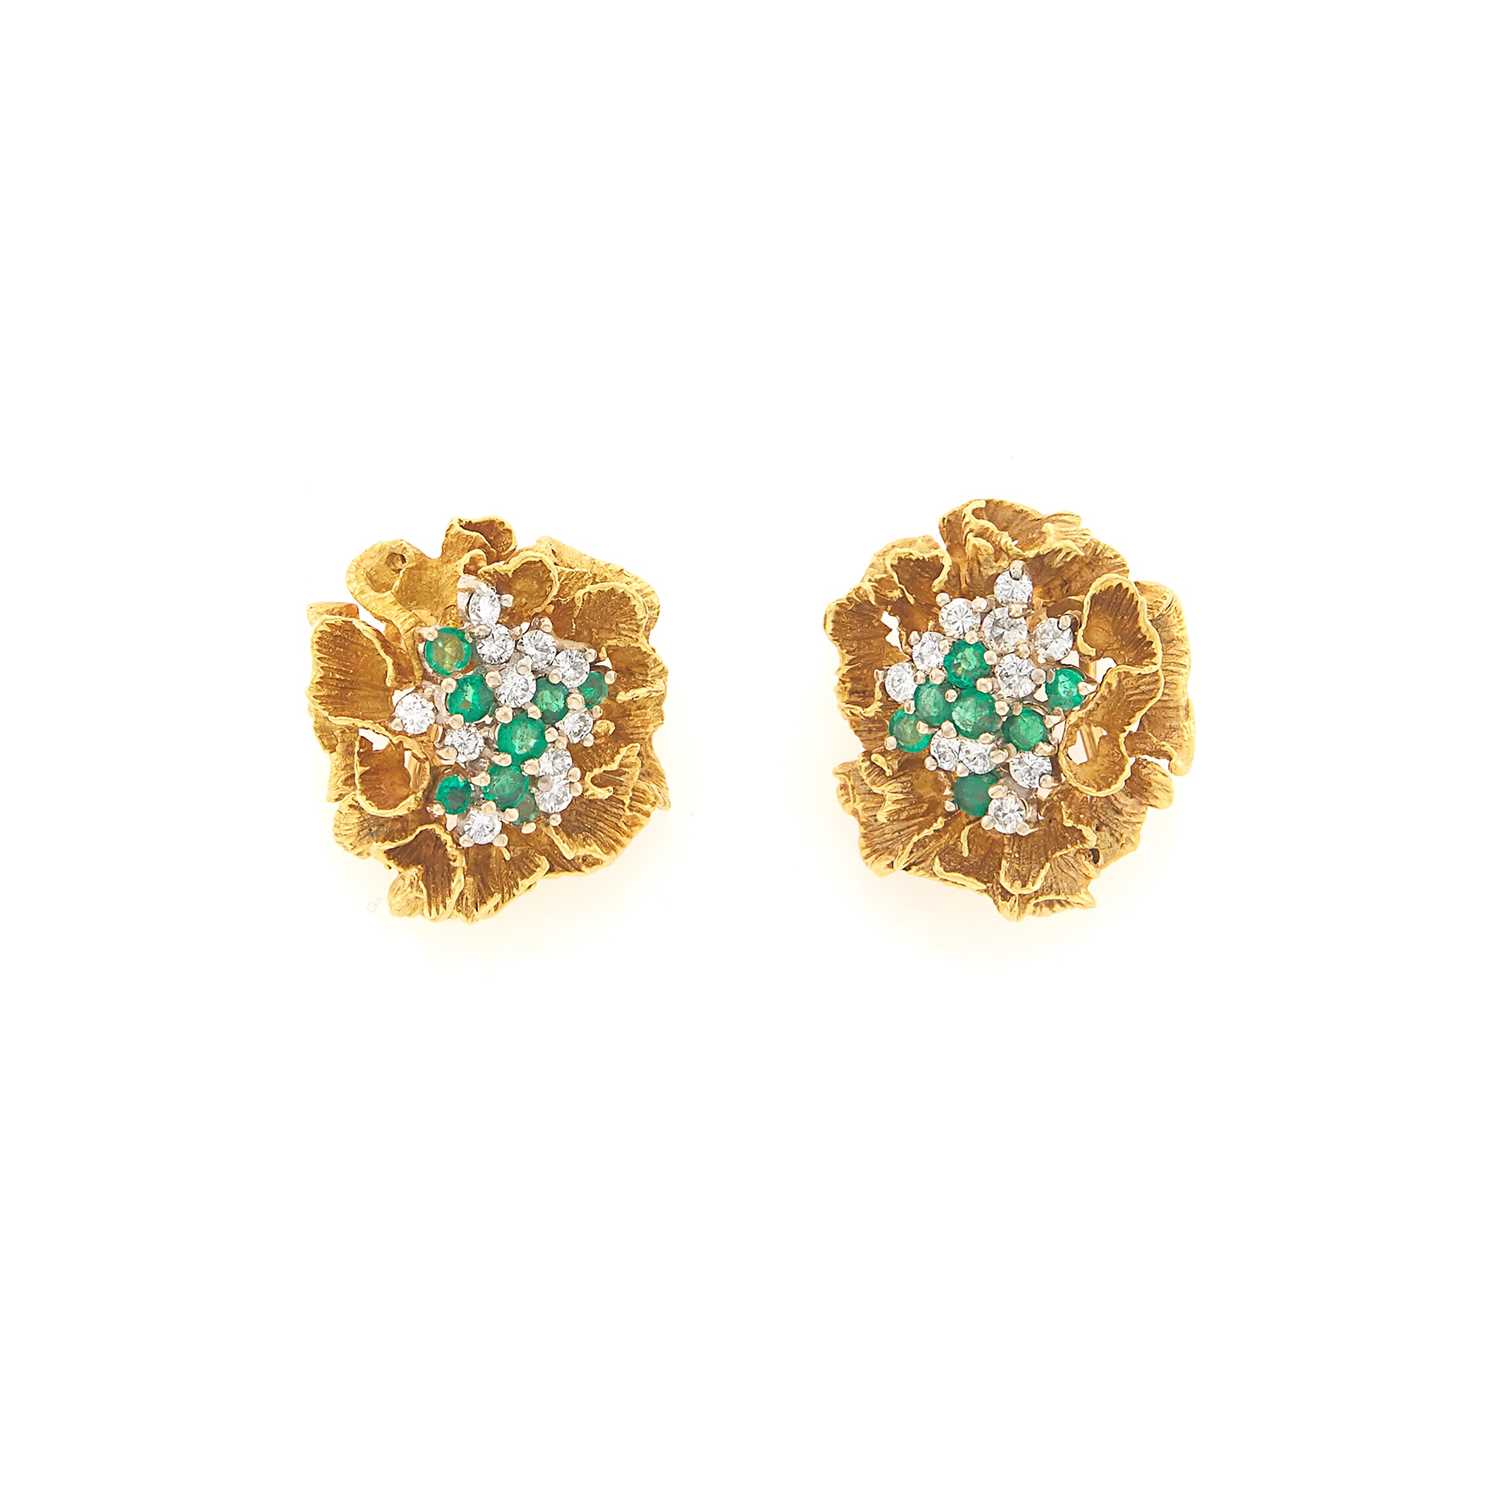 Lot 1007 - Pair of Two-Color Gold, Diamond and Emerald Earclips